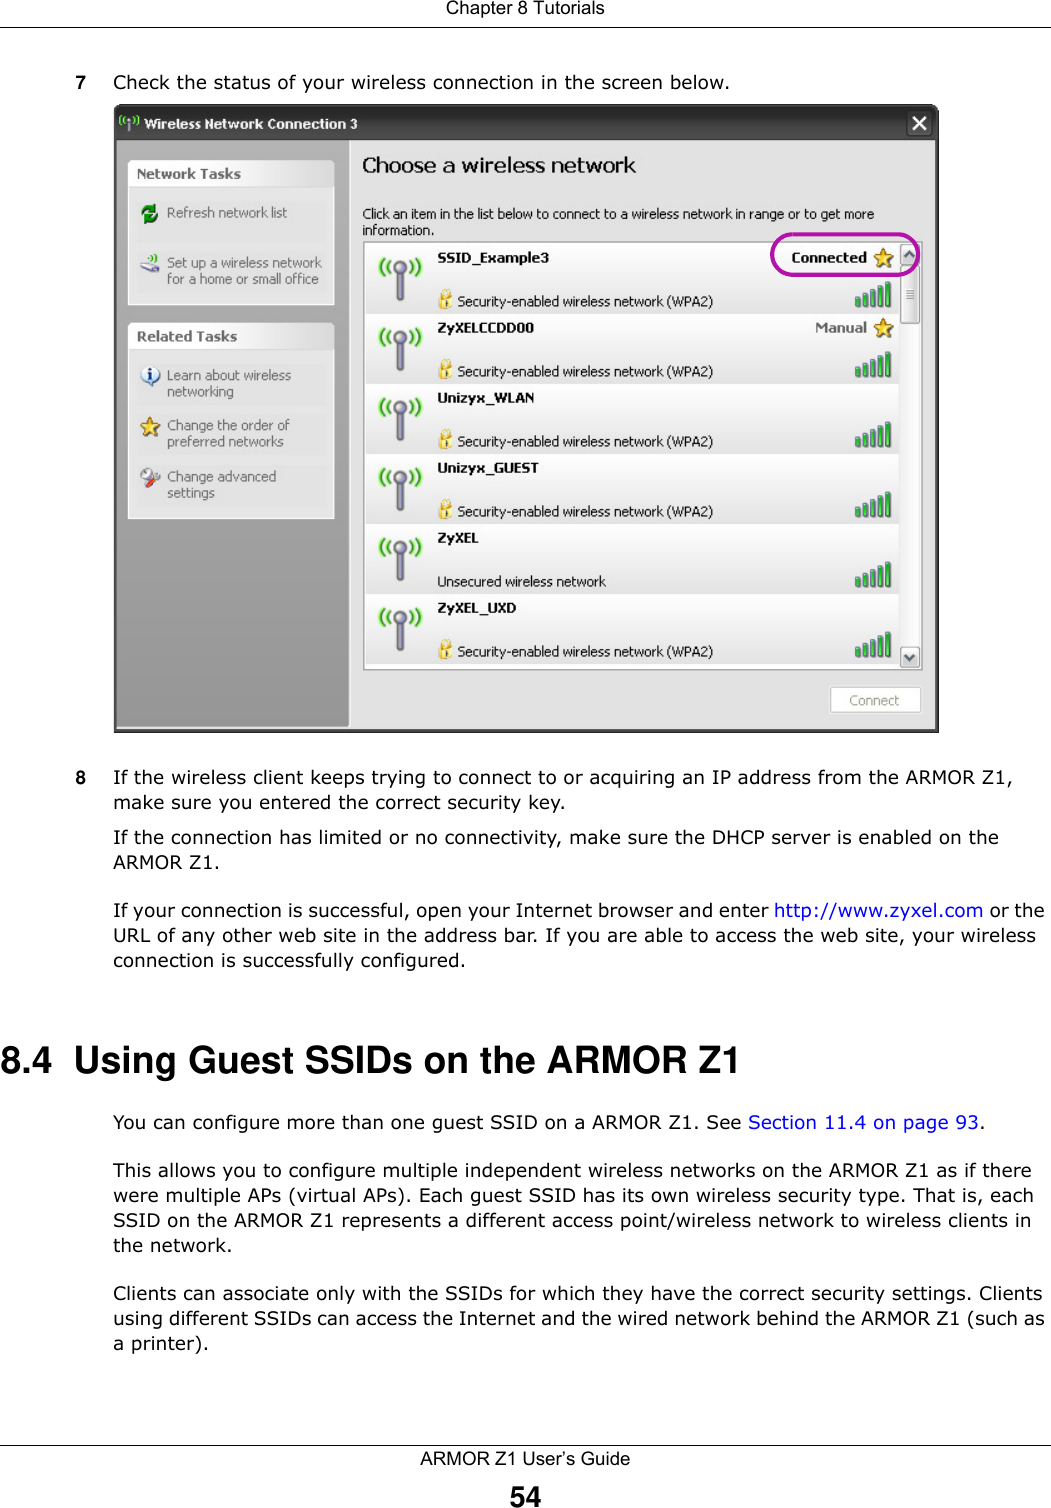 Chapter 8 TutorialsARMOR Z1 User’s Guide547Check the status of your wireless connection in the screen below.  8If the wireless client keeps trying to connect to or acquiring an IP address from the ARMOR Z1, make sure you entered the correct security key.If the connection has limited or no connectivity, make sure the DHCP server is enabled on the ARMOR Z1.If your connection is successful, open your Internet browser and enter http://www.zyxel.com or the URL of any other web site in the address bar. If you are able to access the web site, your wireless connection is successfully configured.8.4  Using Guest SSIDs on the ARMOR Z1You can configure more than one guest SSID on a ARMOR Z1. See Section 11.4 on page 93. This allows you to configure multiple independent wireless networks on the ARMOR Z1 as if there were multiple APs (virtual APs). Each guest SSID has its own wireless security type. That is, each SSID on the ARMOR Z1 represents a different access point/wireless network to wireless clients in the network. Clients can associate only with the SSIDs for which they have the correct security settings. Clients using different SSIDs can access the Internet and the wired network behind the ARMOR Z1 (such as a printer). 